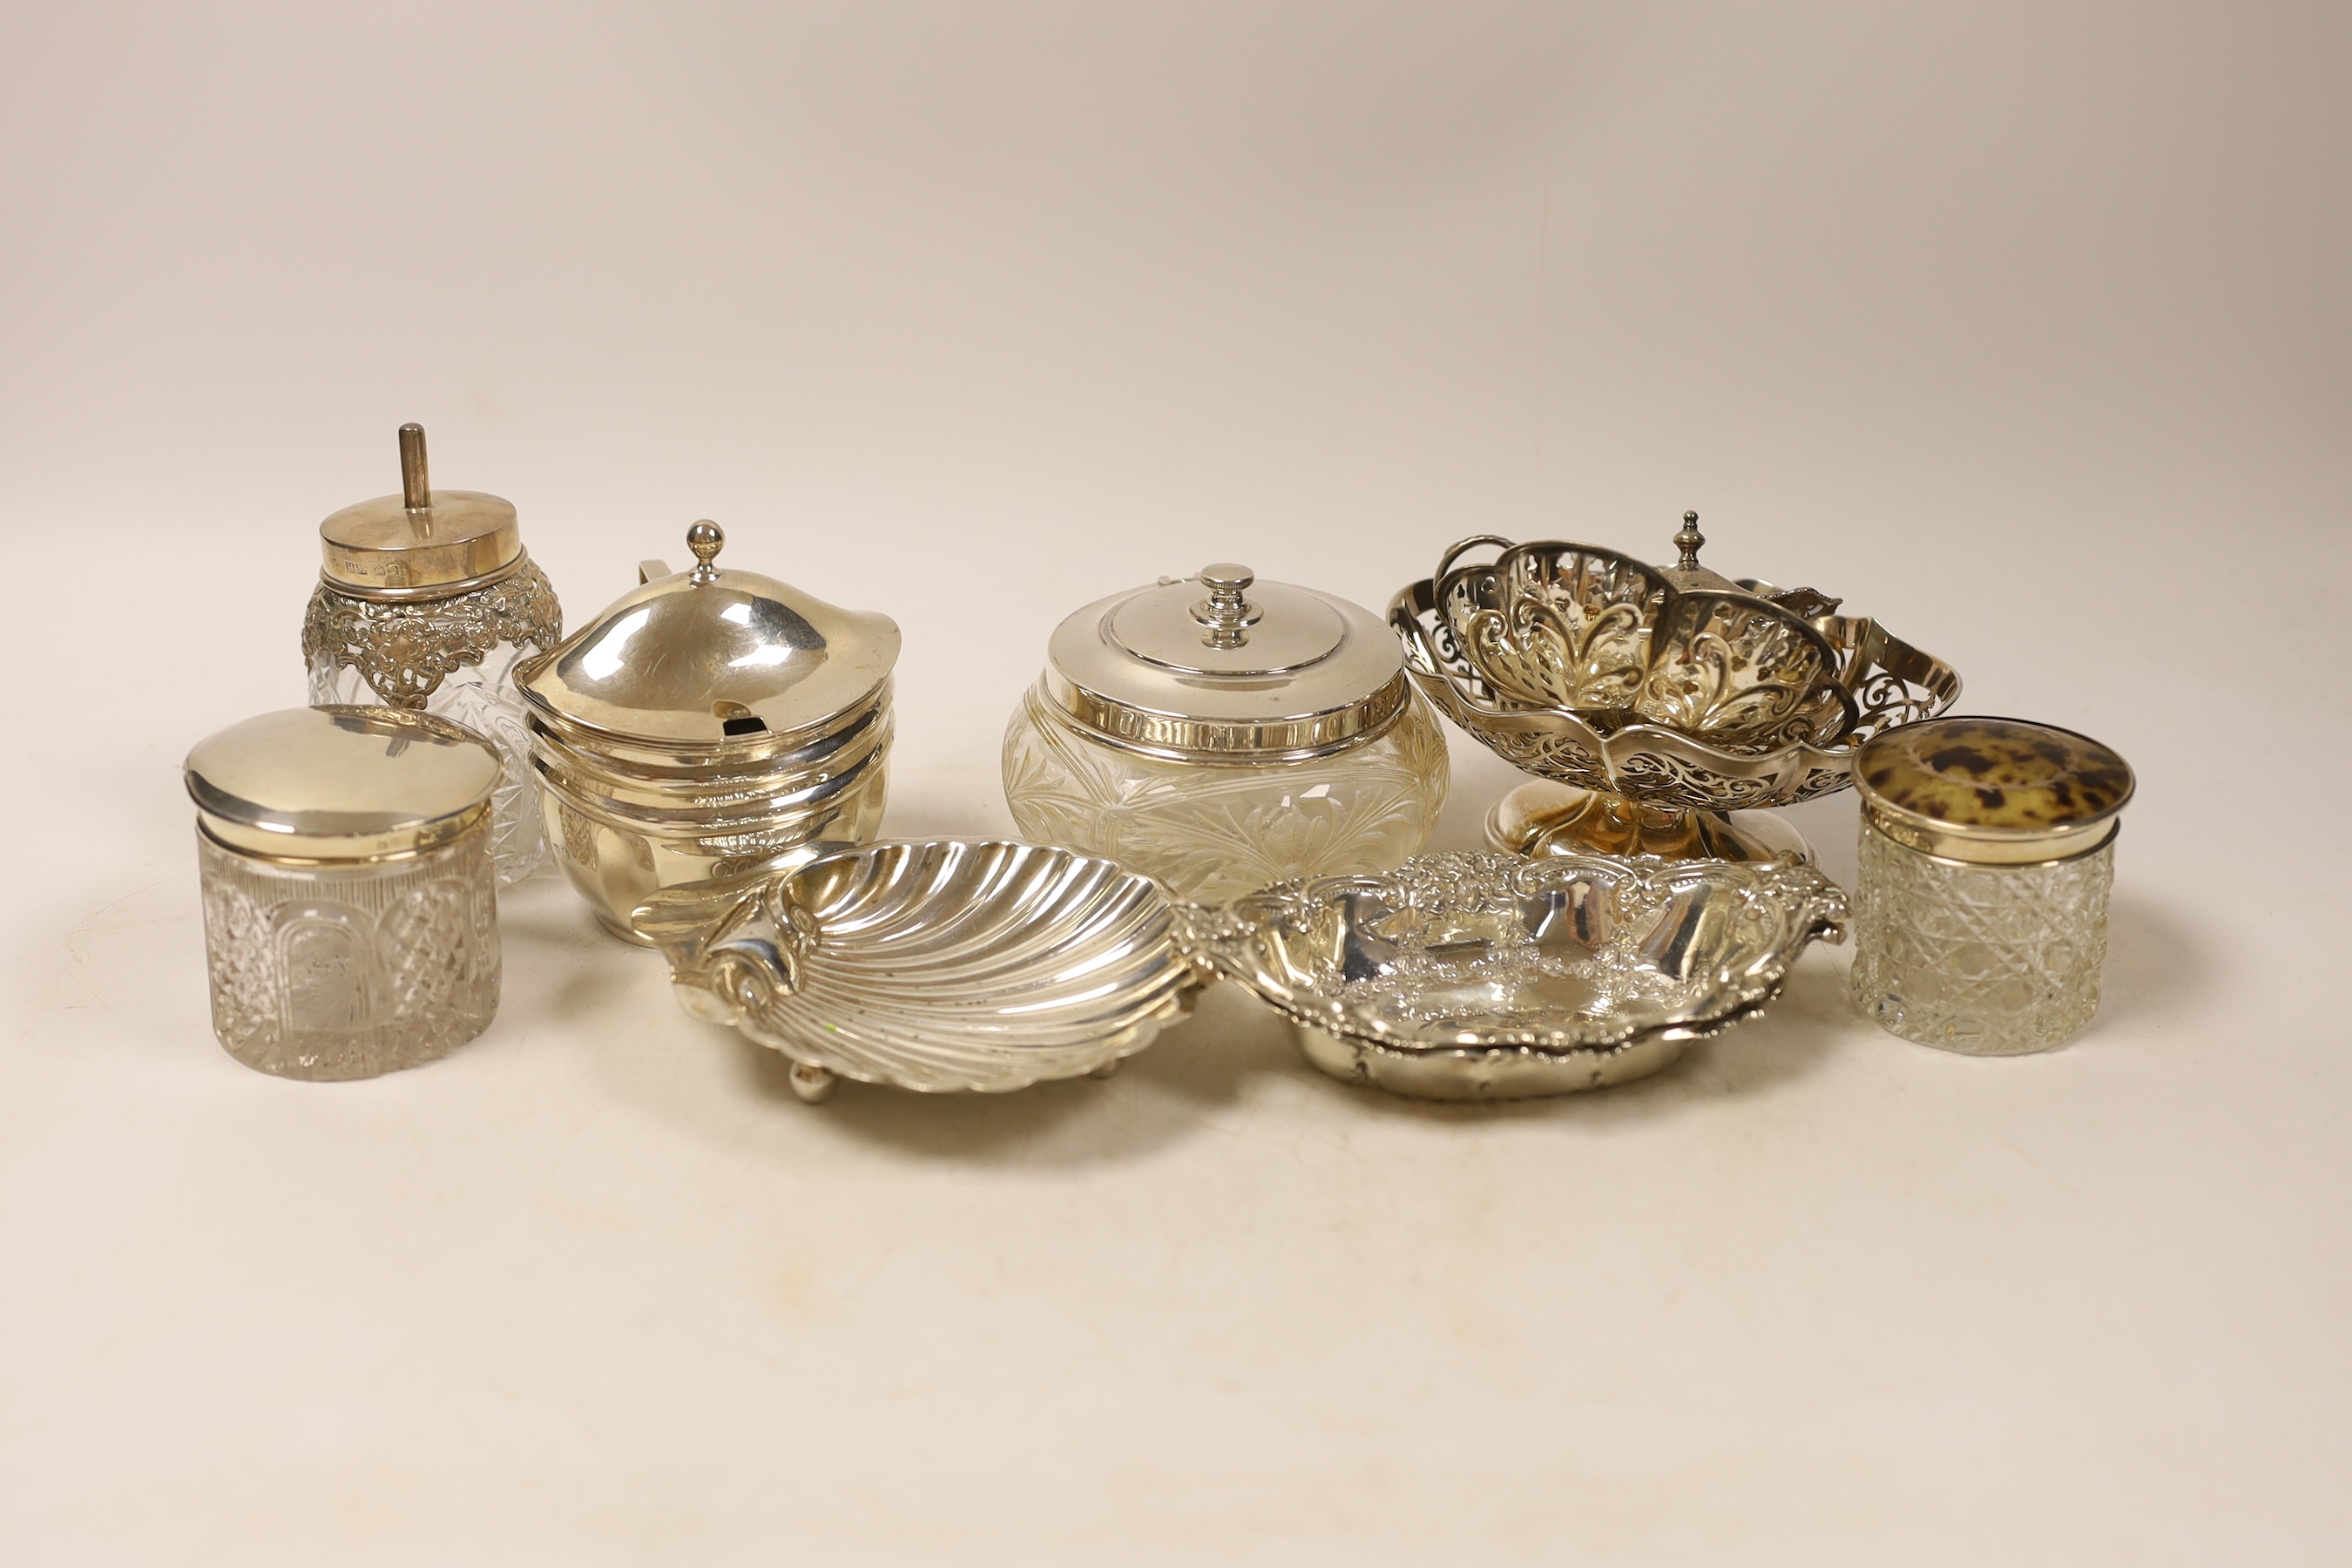 A group of silverware including a pair of bonbon dishes, butter shell, pierced dishes, toilet jars and a George III mustard, London, 1806, etc.